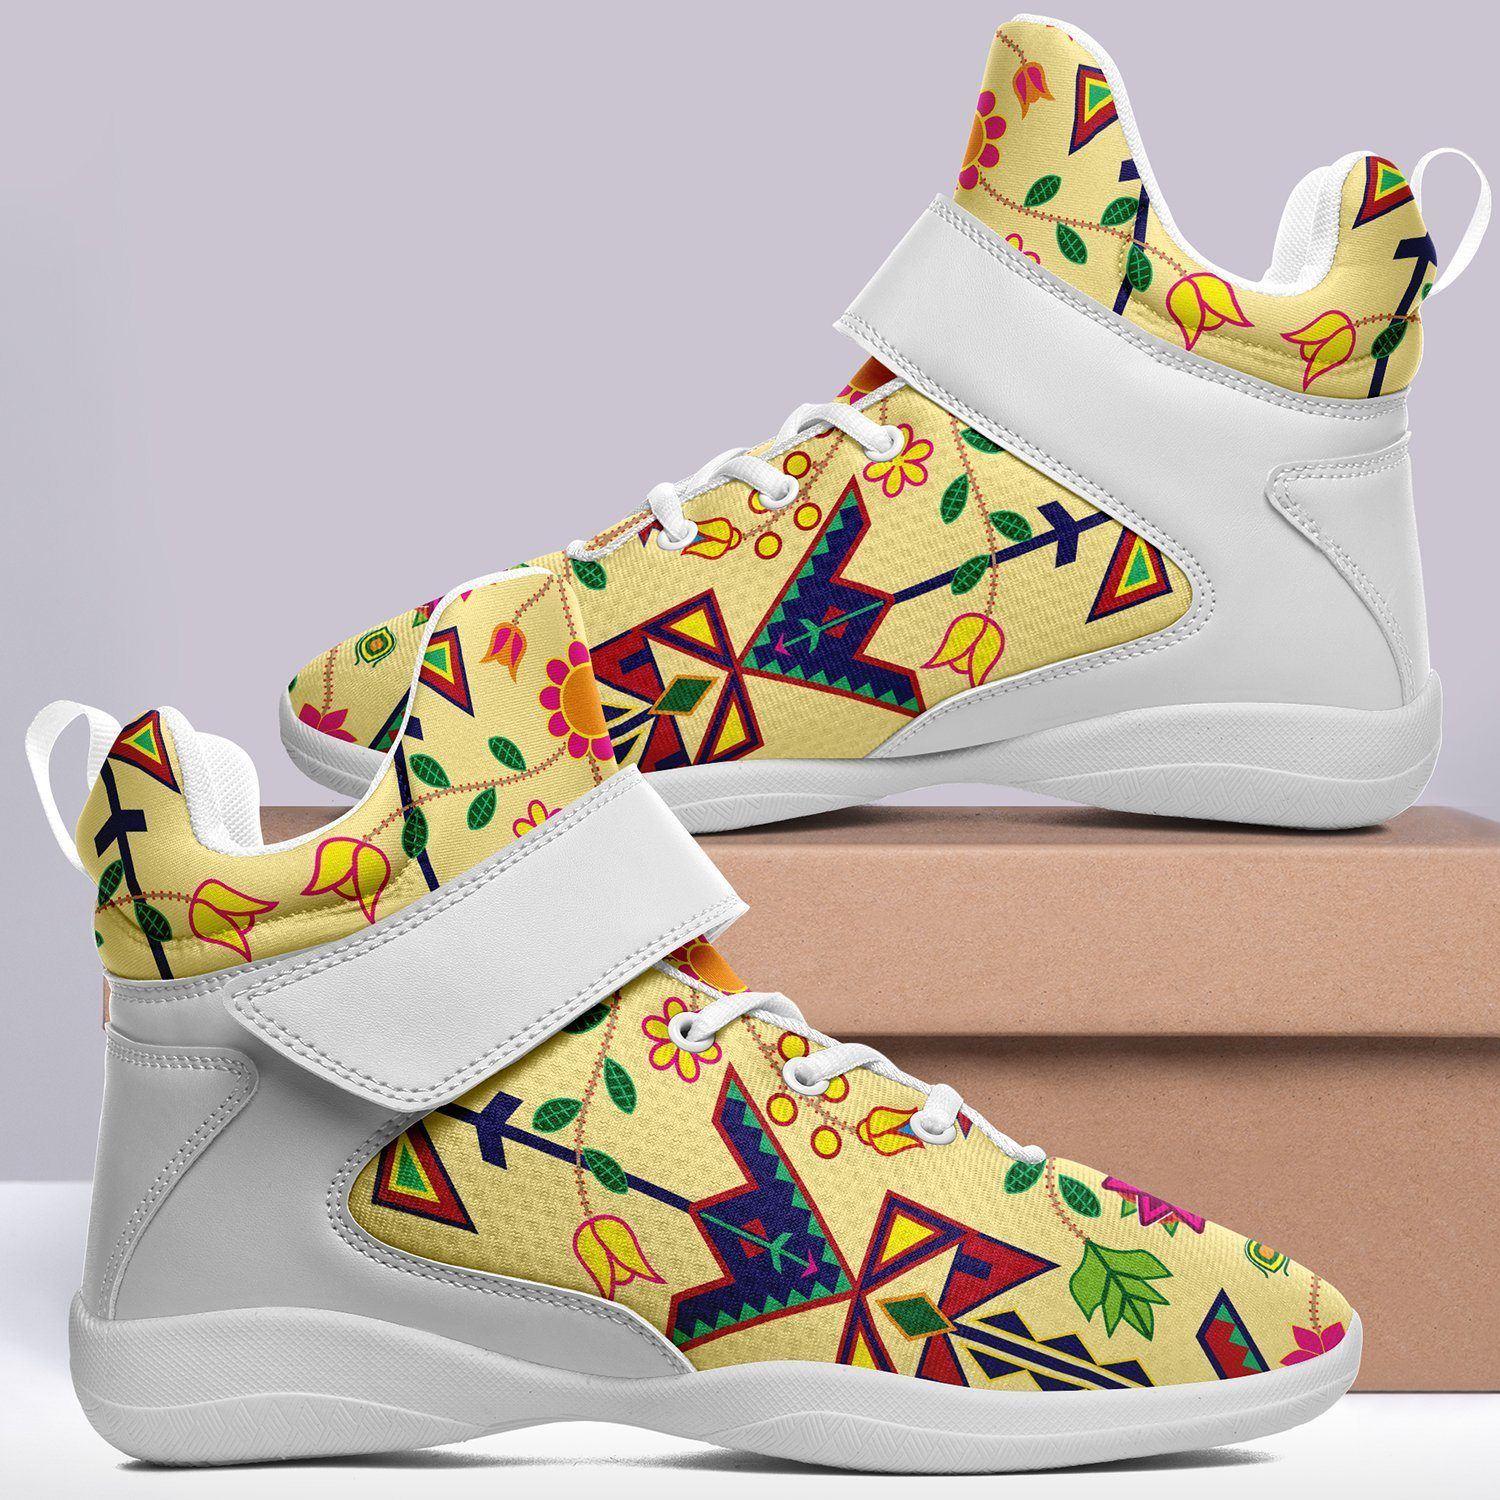 Geometric Floral Spring Vanilla Ipottaa Basketball / Sport High Top Shoes - White Sole 49 Dzine 